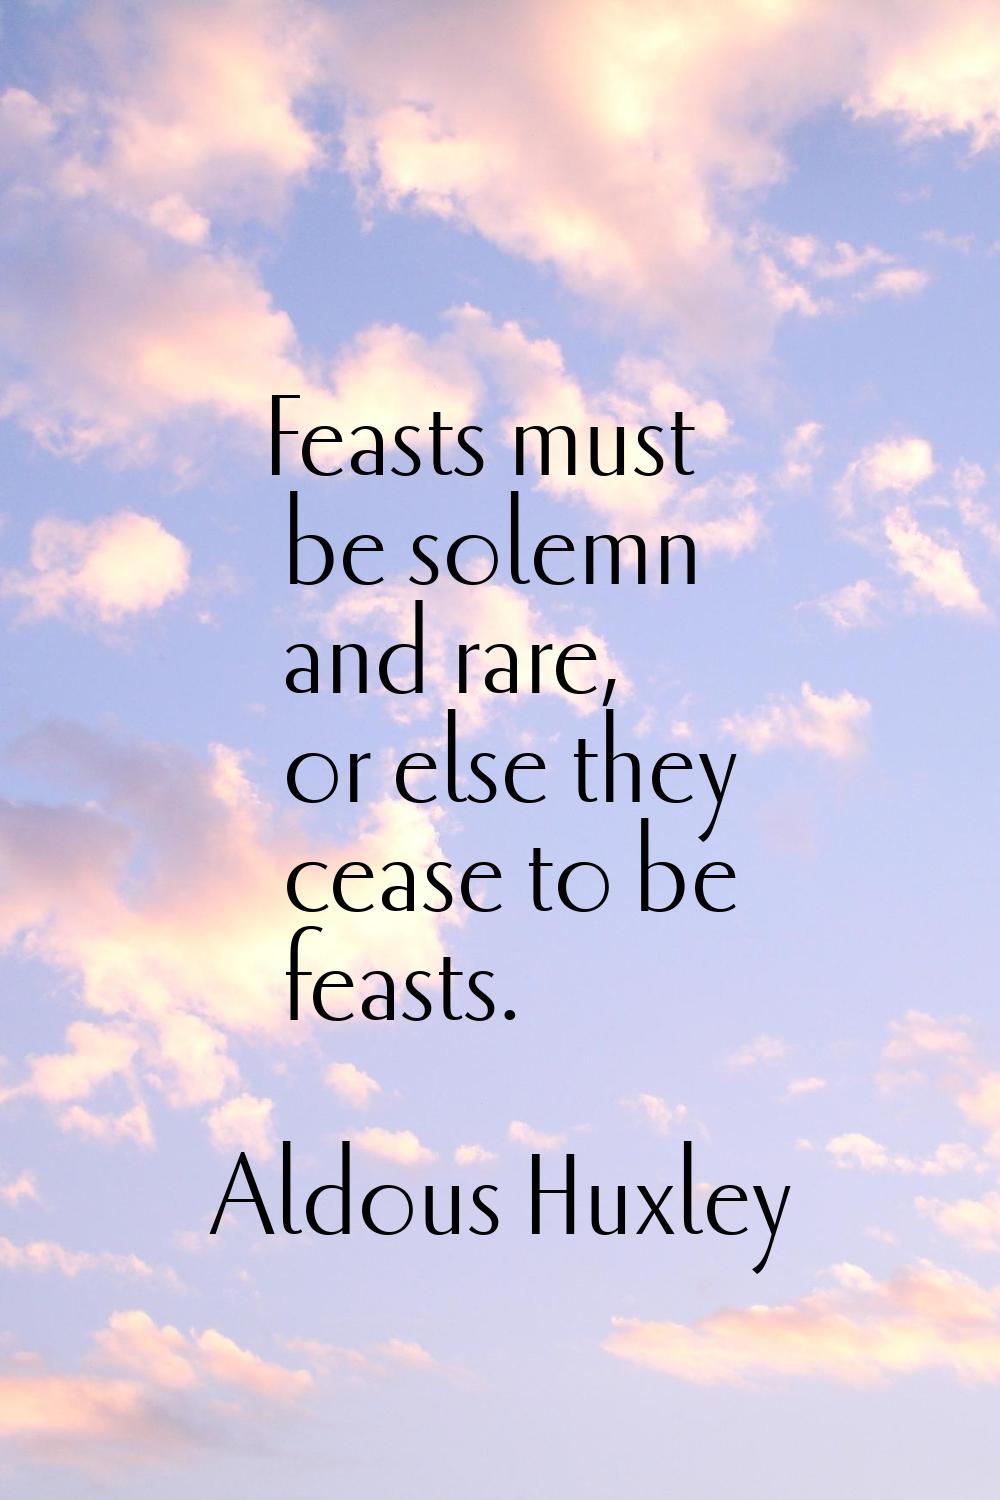 Feasts must be solemn and rare, or else they cease to be feasts.